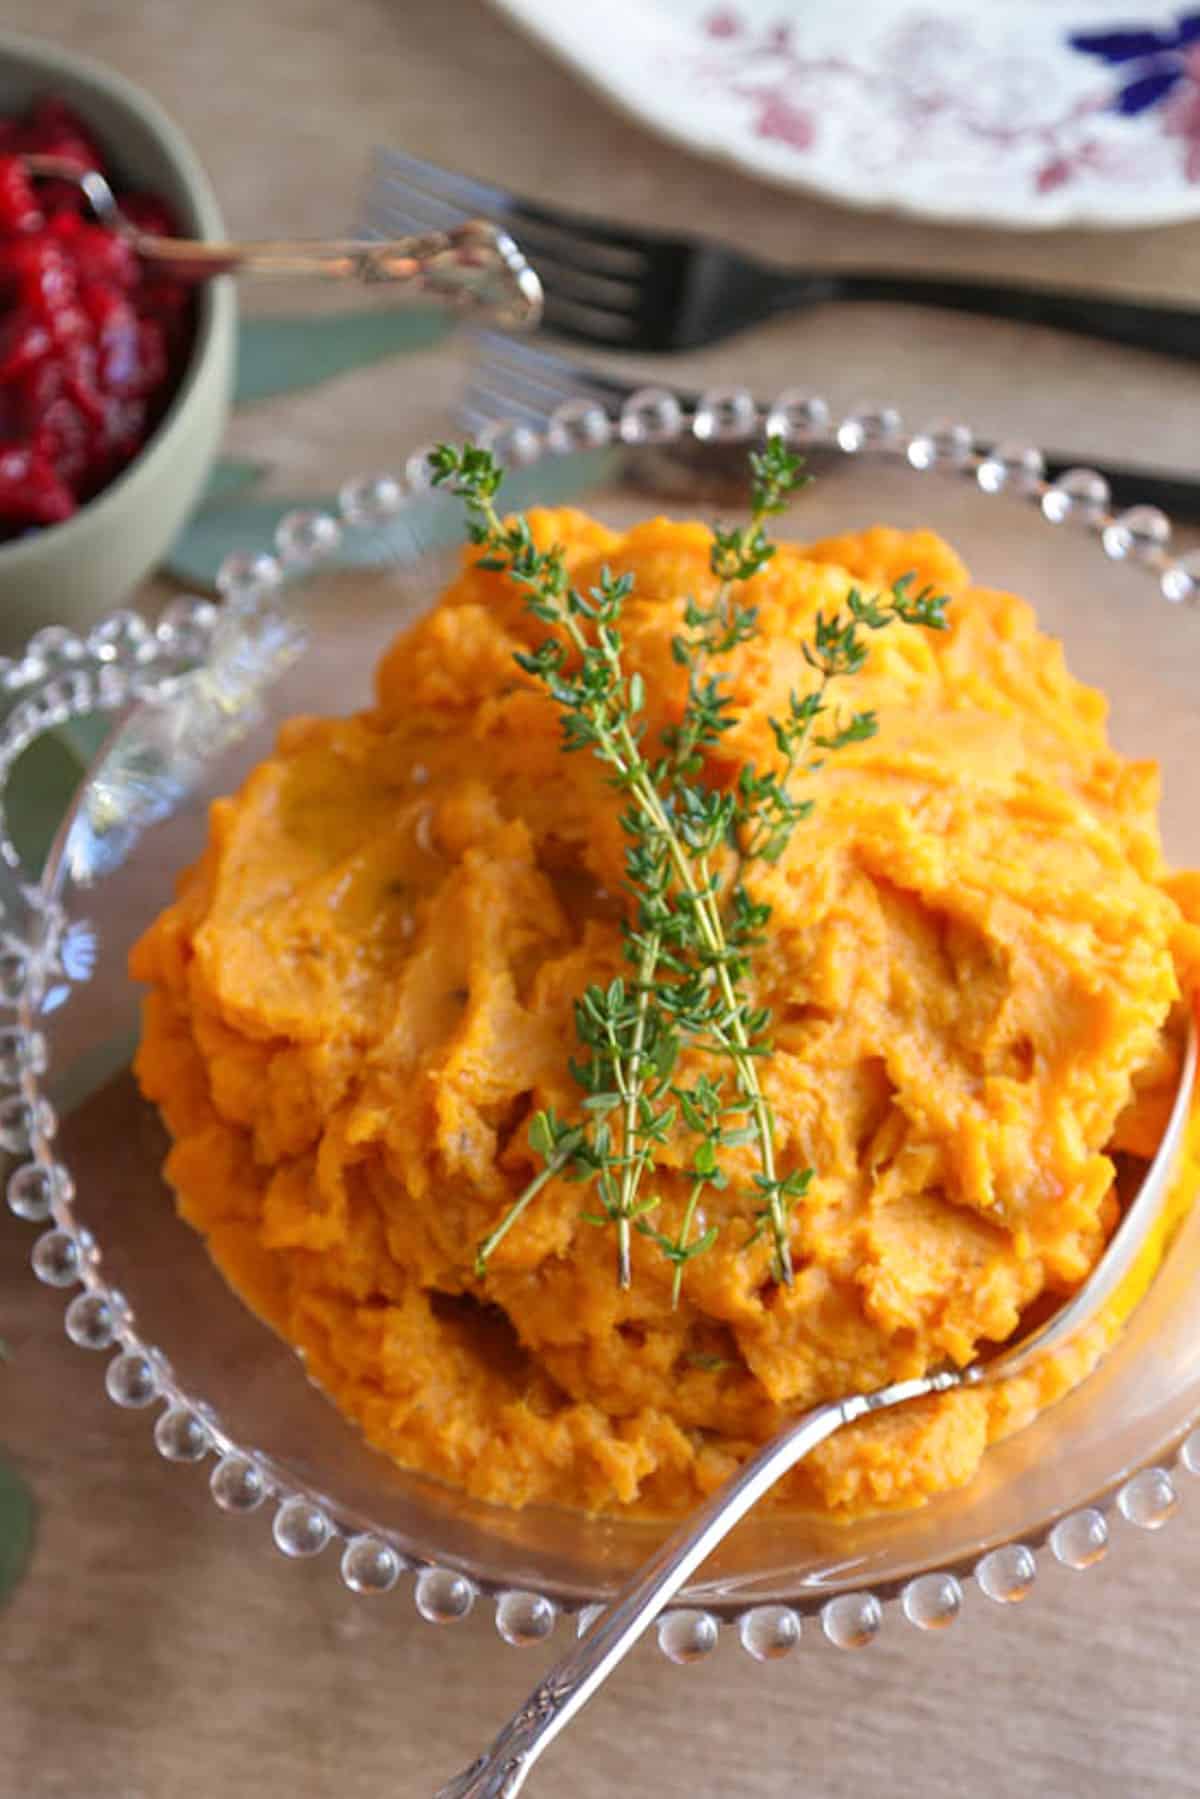 mashed sweet potatoes topped with fresh thyme in a glass decorative dish.